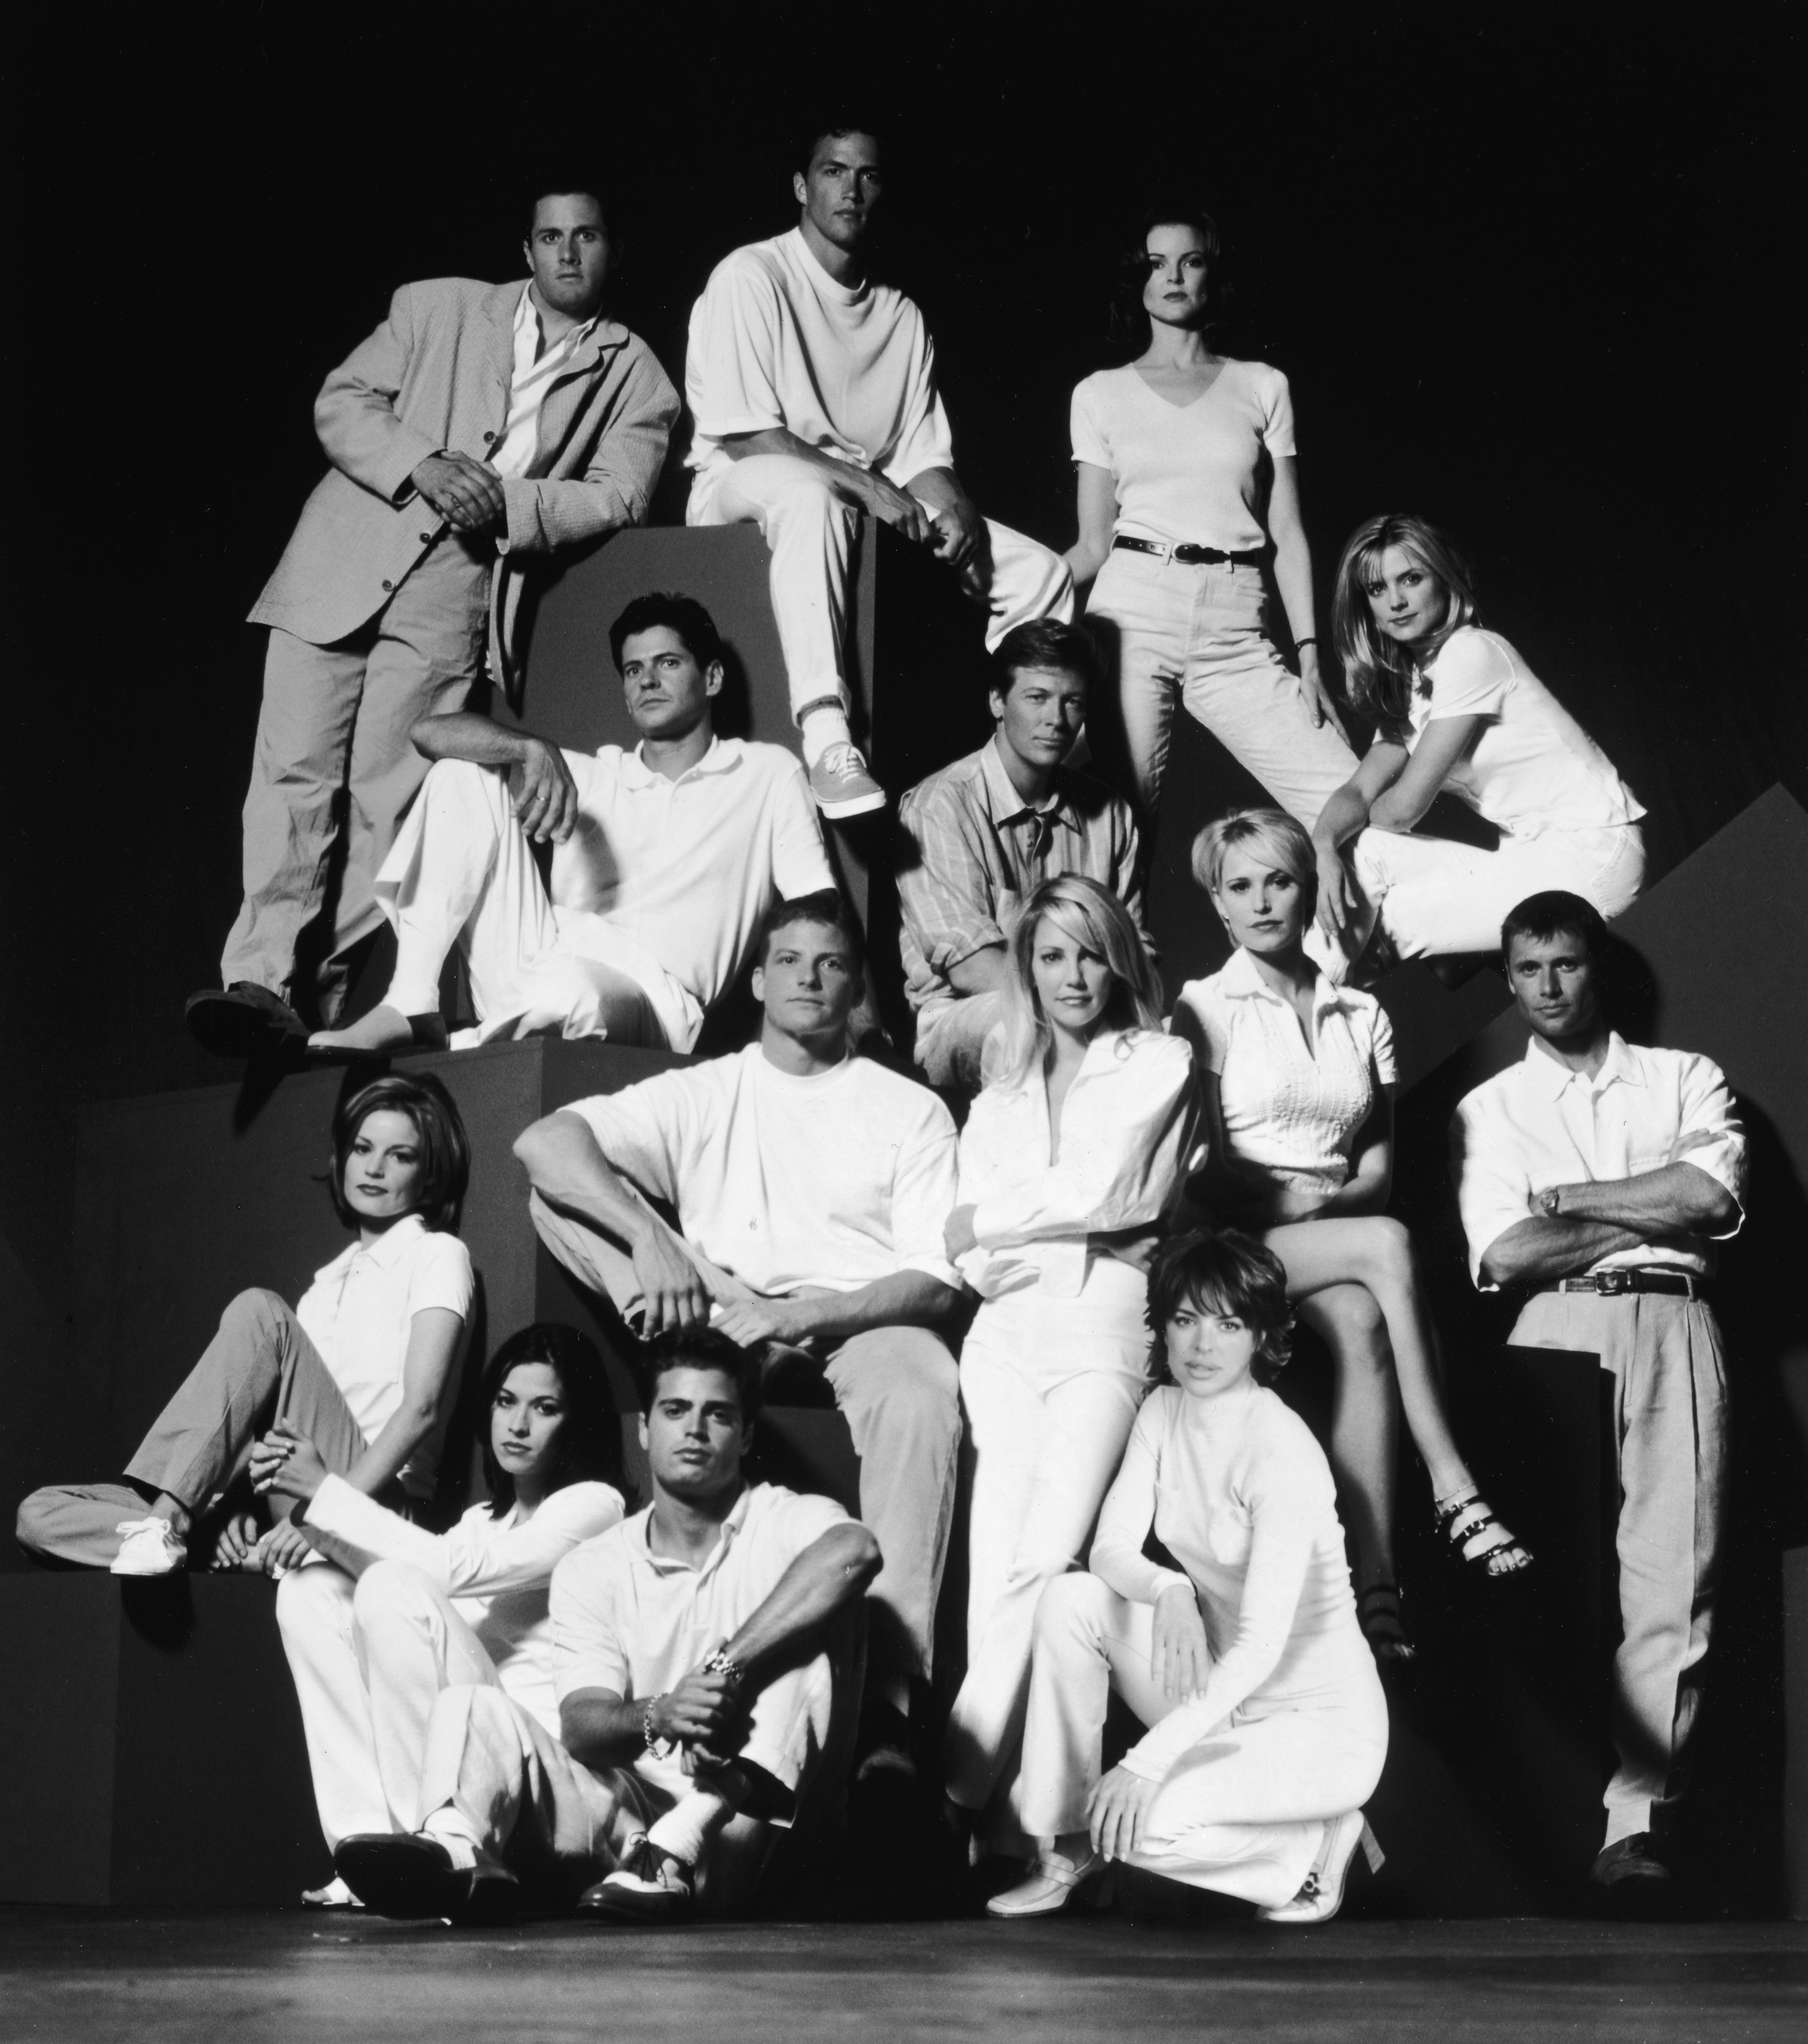 Marcia Cross and the cast of "Melrose Place," circa 1996. | Source: Getty Images